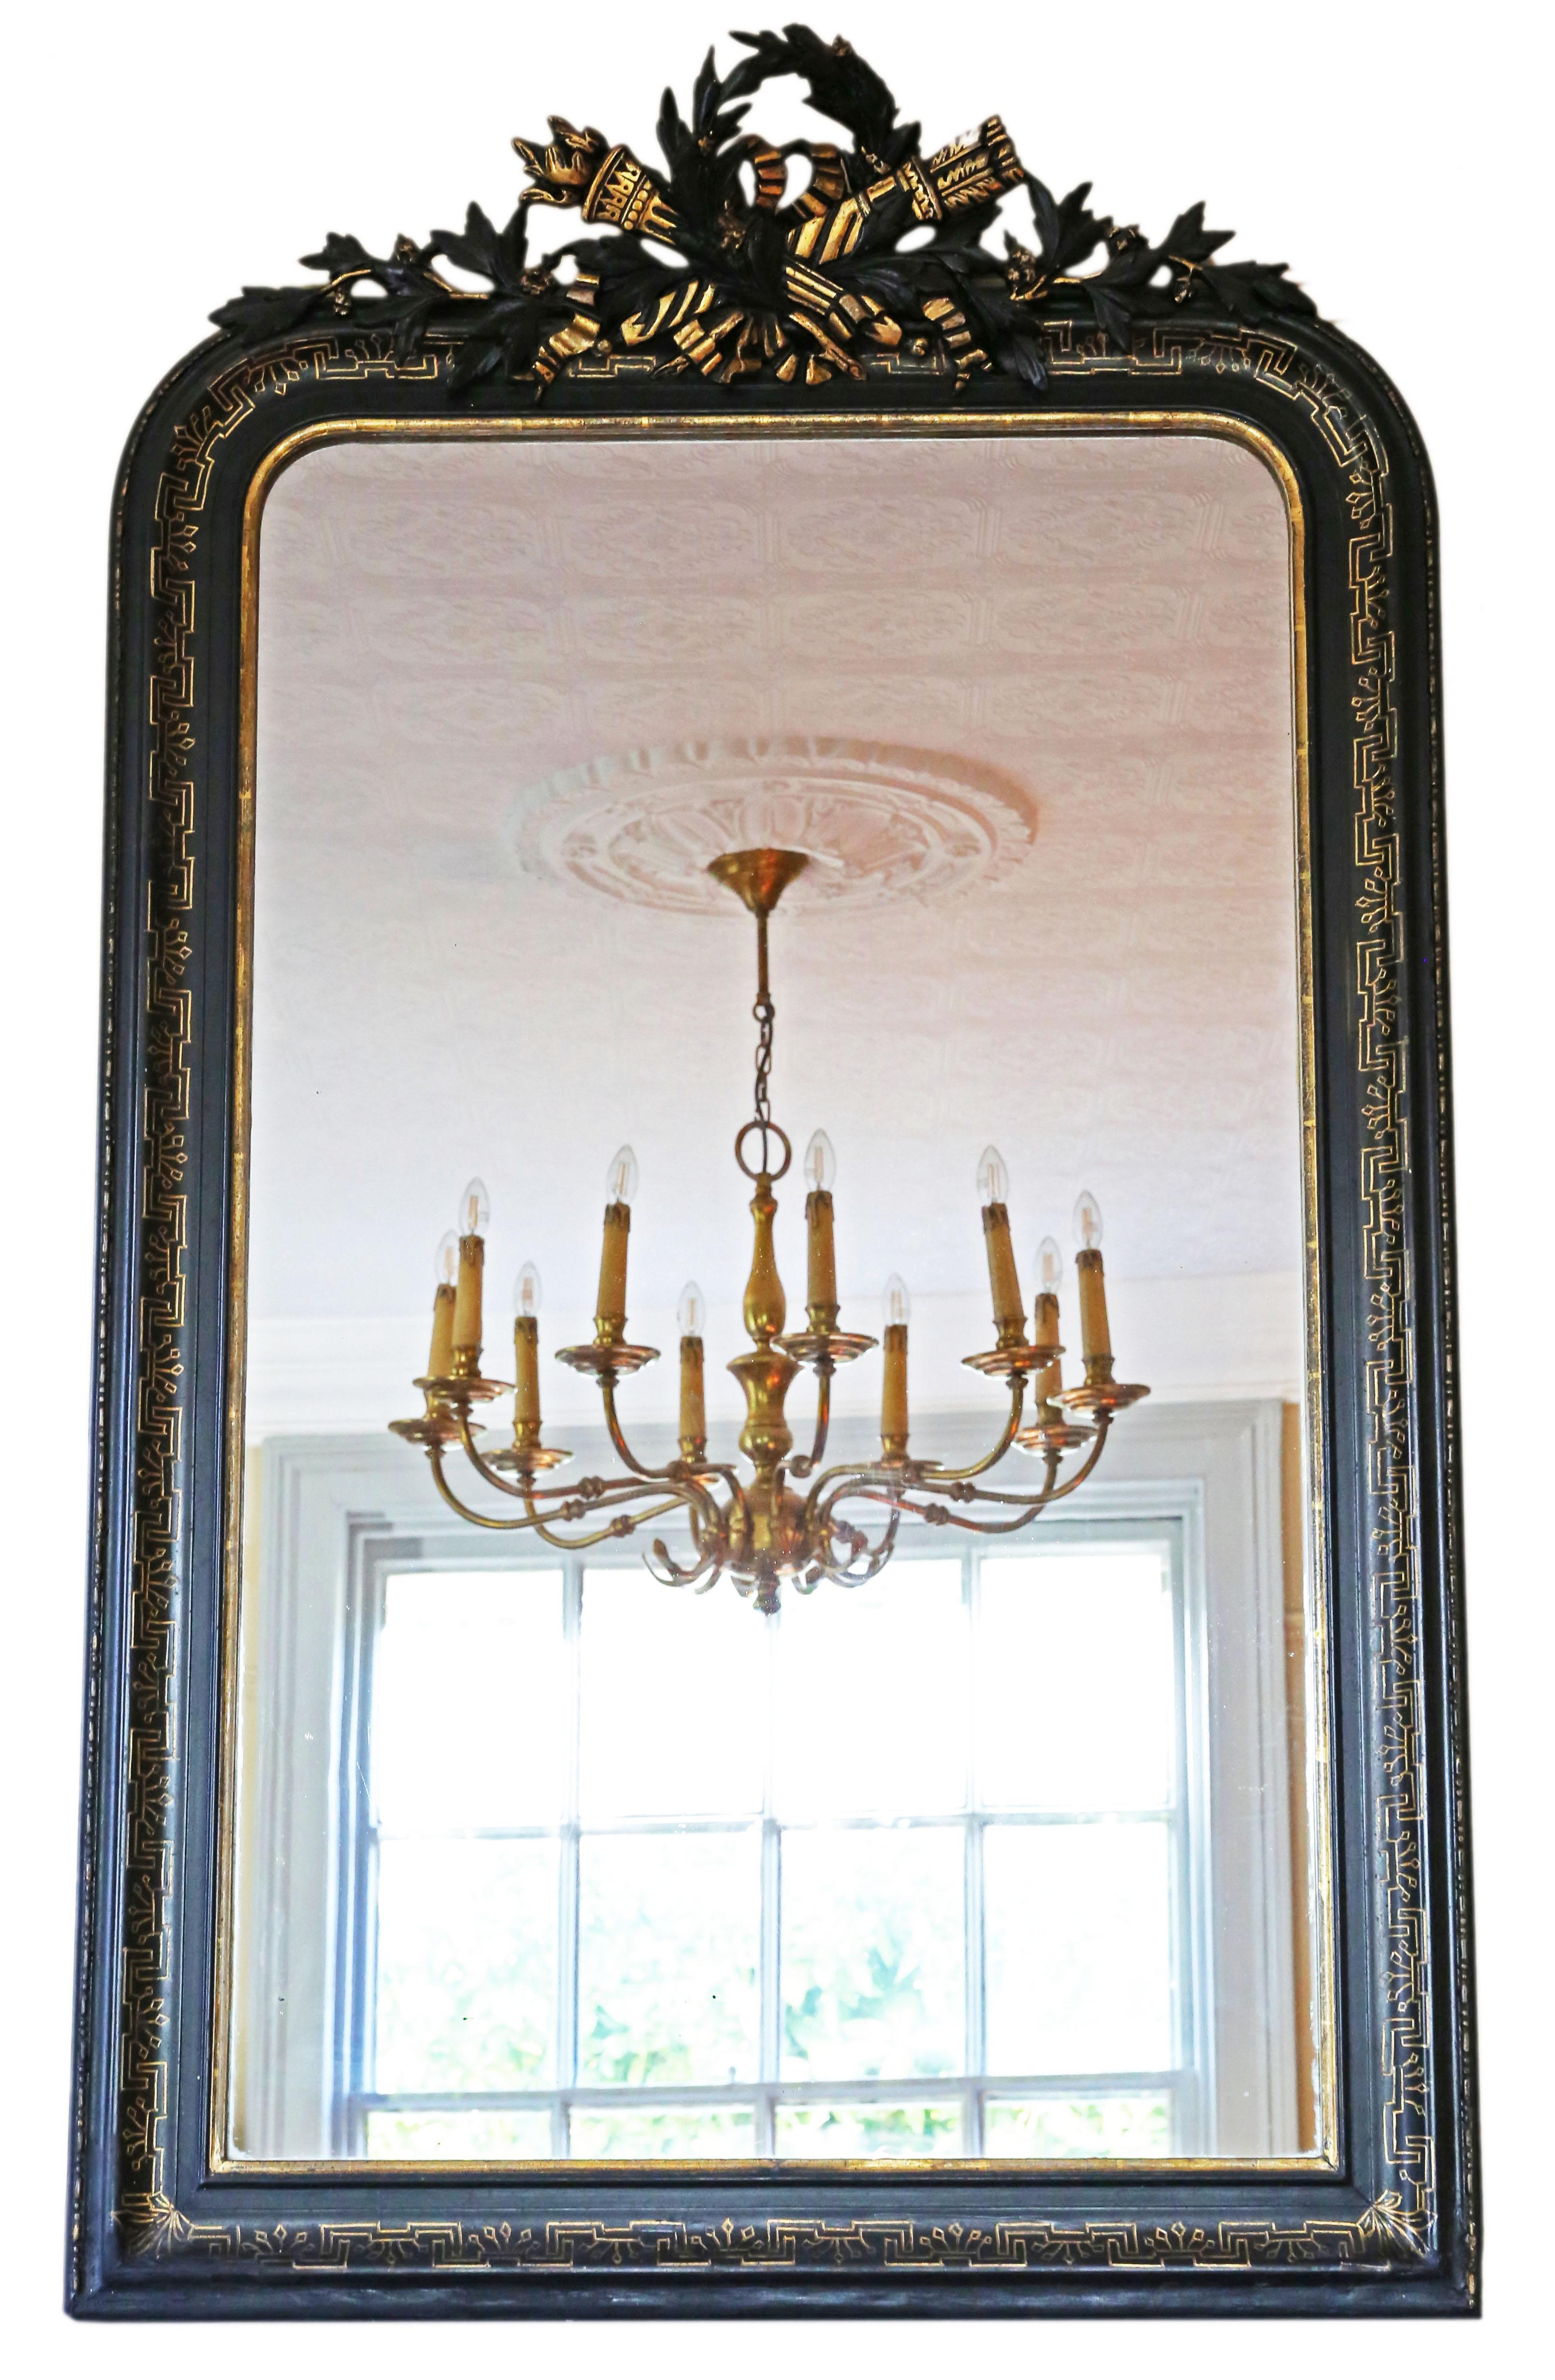 Antique large fine quality decorative ebonised and gilt overmantle wall mirror, 19th Century.

An impressive rare find, that would look amazing in the right location. No loose joints or woodworm.

The mirrored glass has light oxidation/hazing